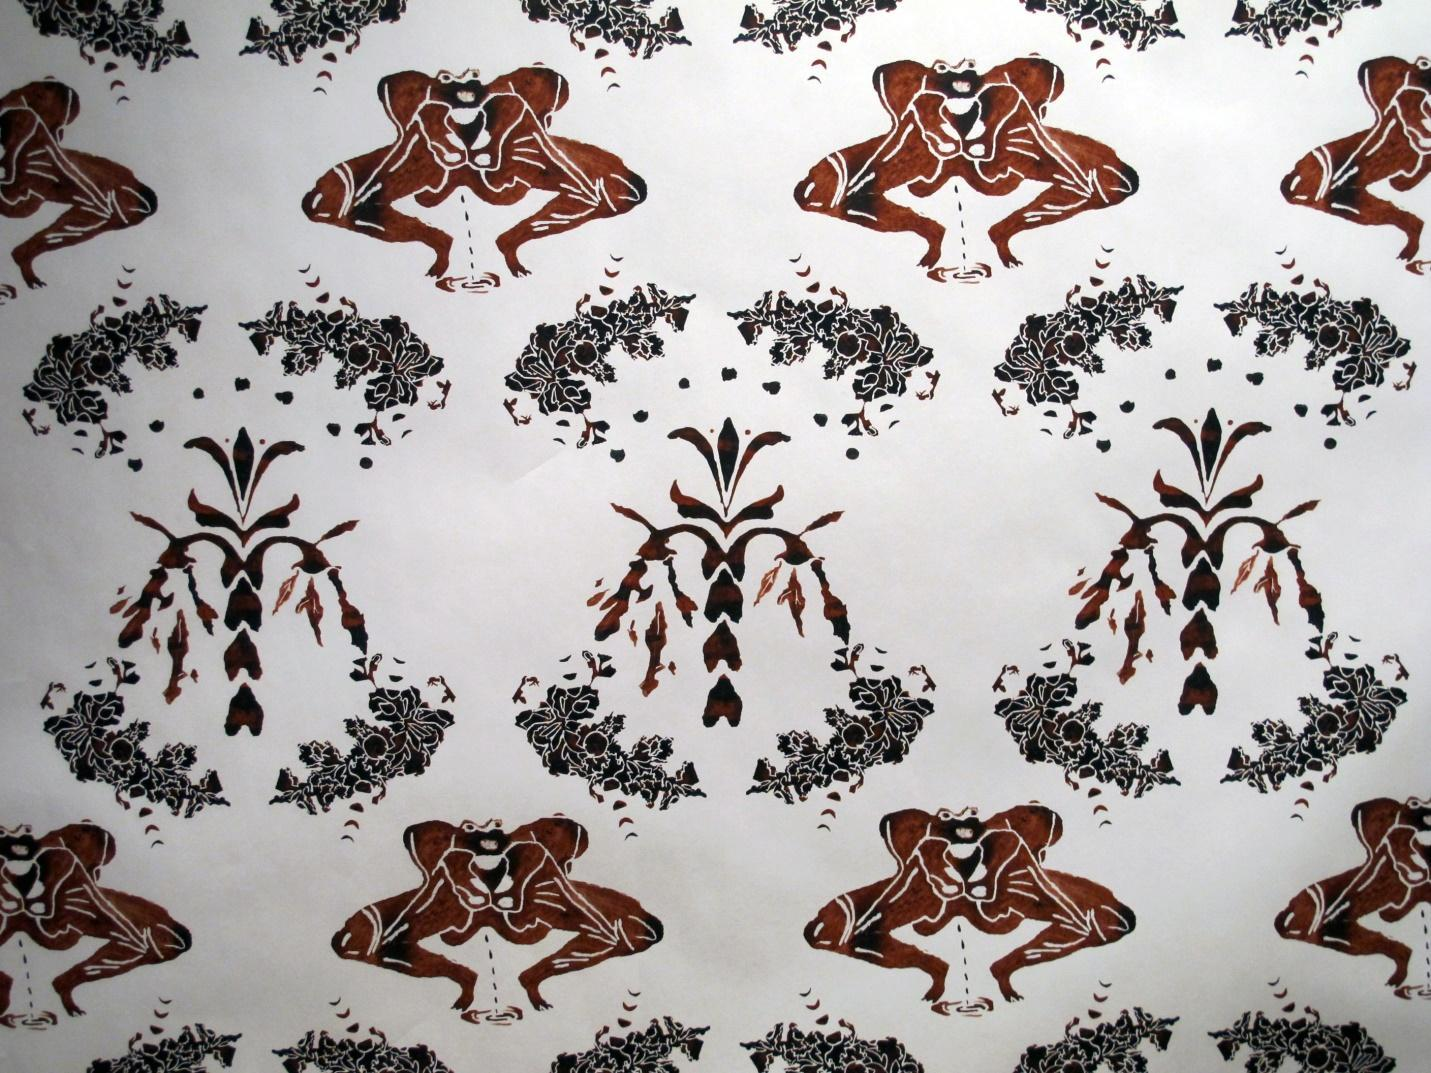 This is a detail image of digital wallpaper print
        by Vanessa Dion Fletcher that is part of the exhibition Own Your Cervix
        at the Tangled Art Gallery. This print was made using the artists menstrual
        blood and features a repeating pattern of three images (motifs). The first
        motif, which appears at the top of the work and bottom of the image, is
        an illustration of legs squatting and protruding from a pelvis creating
        a diamond shape. The pelvis bones are disproportionately larger than the
        legs and there is a stream of blood pouring out of the pelvis, forming
        a pool underneath. The second motif is a black semicircular ornamental
        floral shape mirrored horizontally beside it. The third motif is a damask
        pattern shaped like a floral sprig with a long stem and two drooping leaves
        on either side. The pattern in the wallpaper alternates between legs and
        pelvis figure, mirrored semicircular floral shapes, and a damask motif.